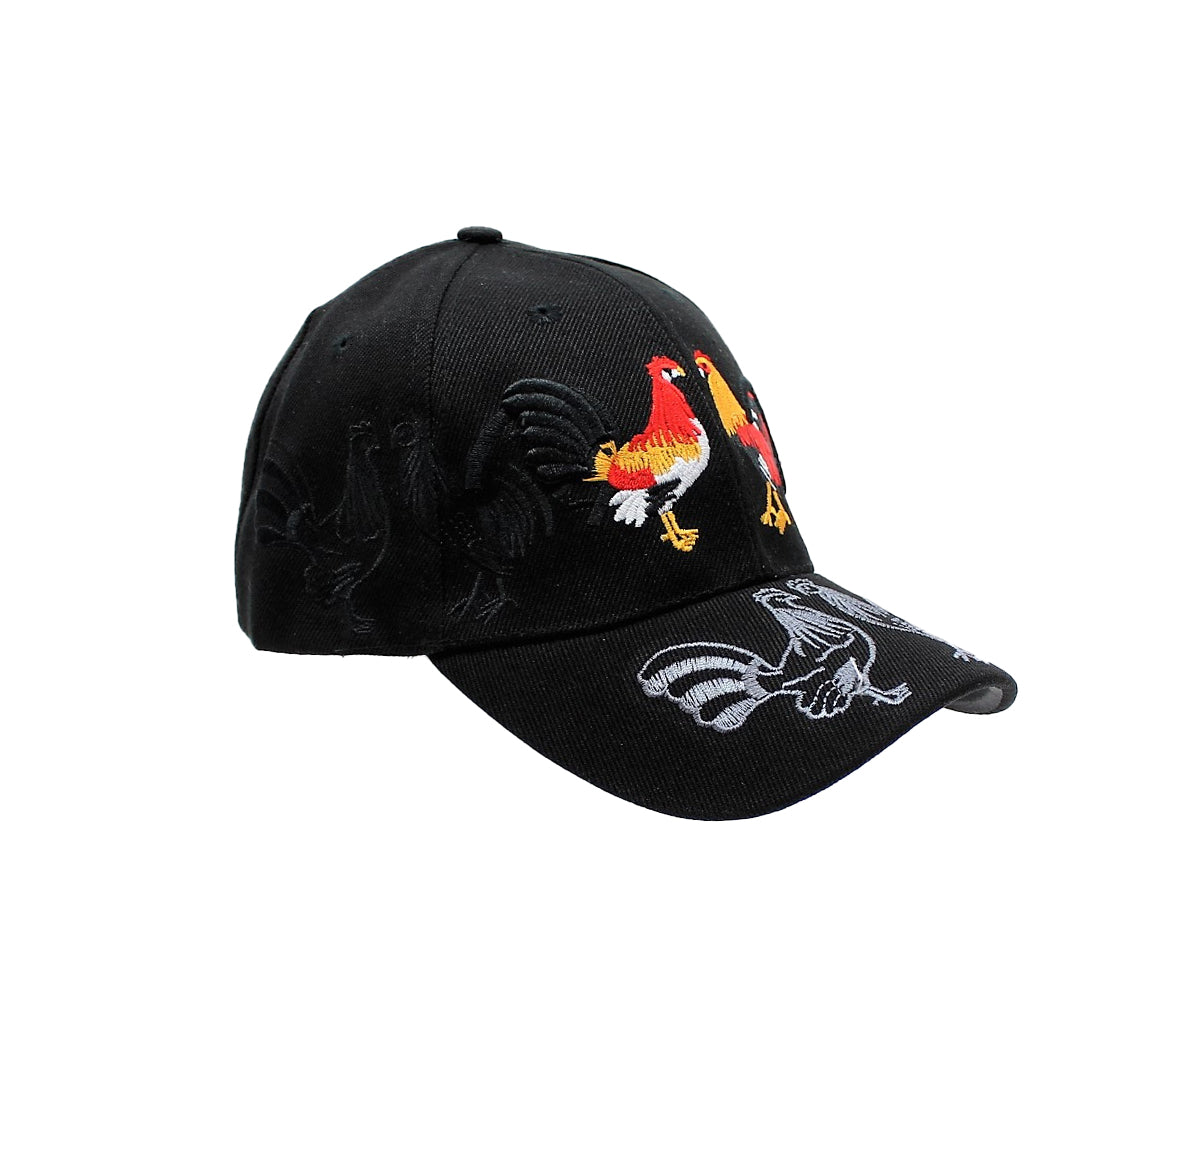 Cap with Rooster Design